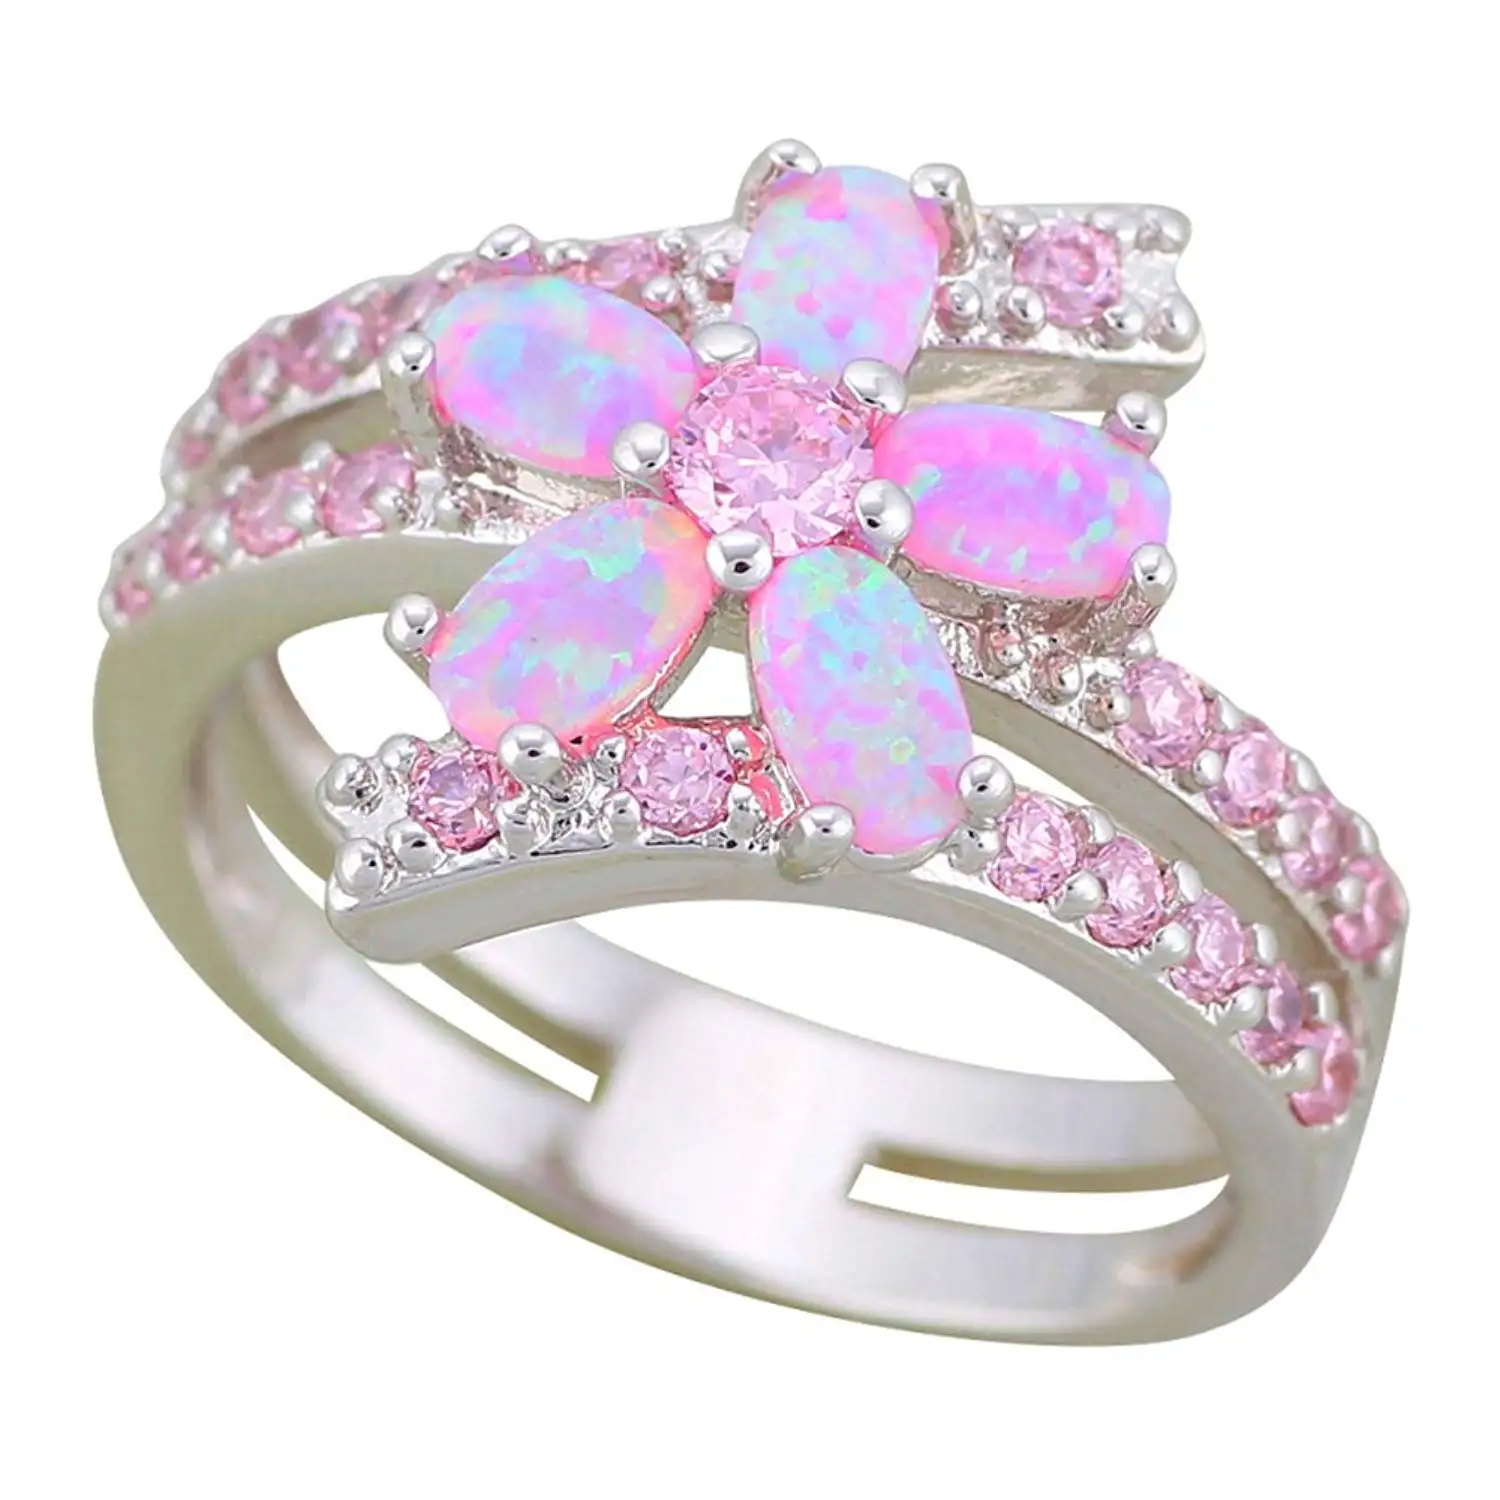 F&F jewel Fashion Heart Design White Fire Opal Rings For Women Wedding Ring Engagement Bridal Rings